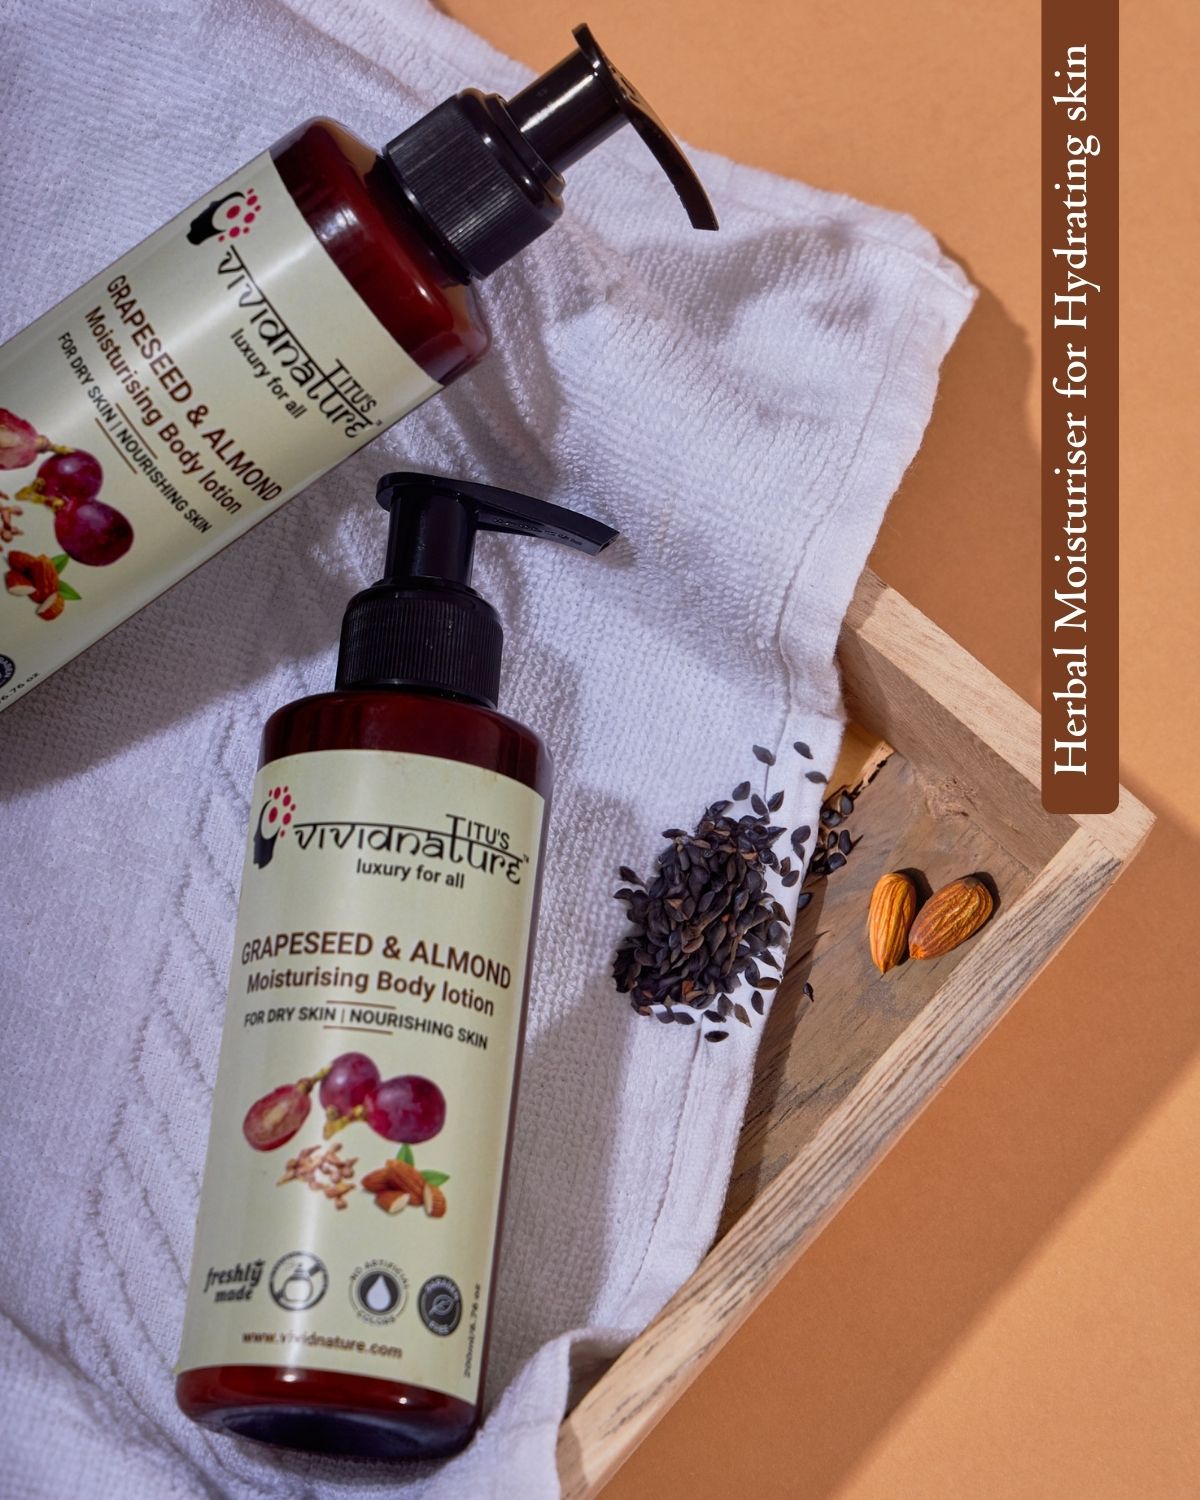 Grapeseed & Almond Bodylotion | Body lotion best for dry skin